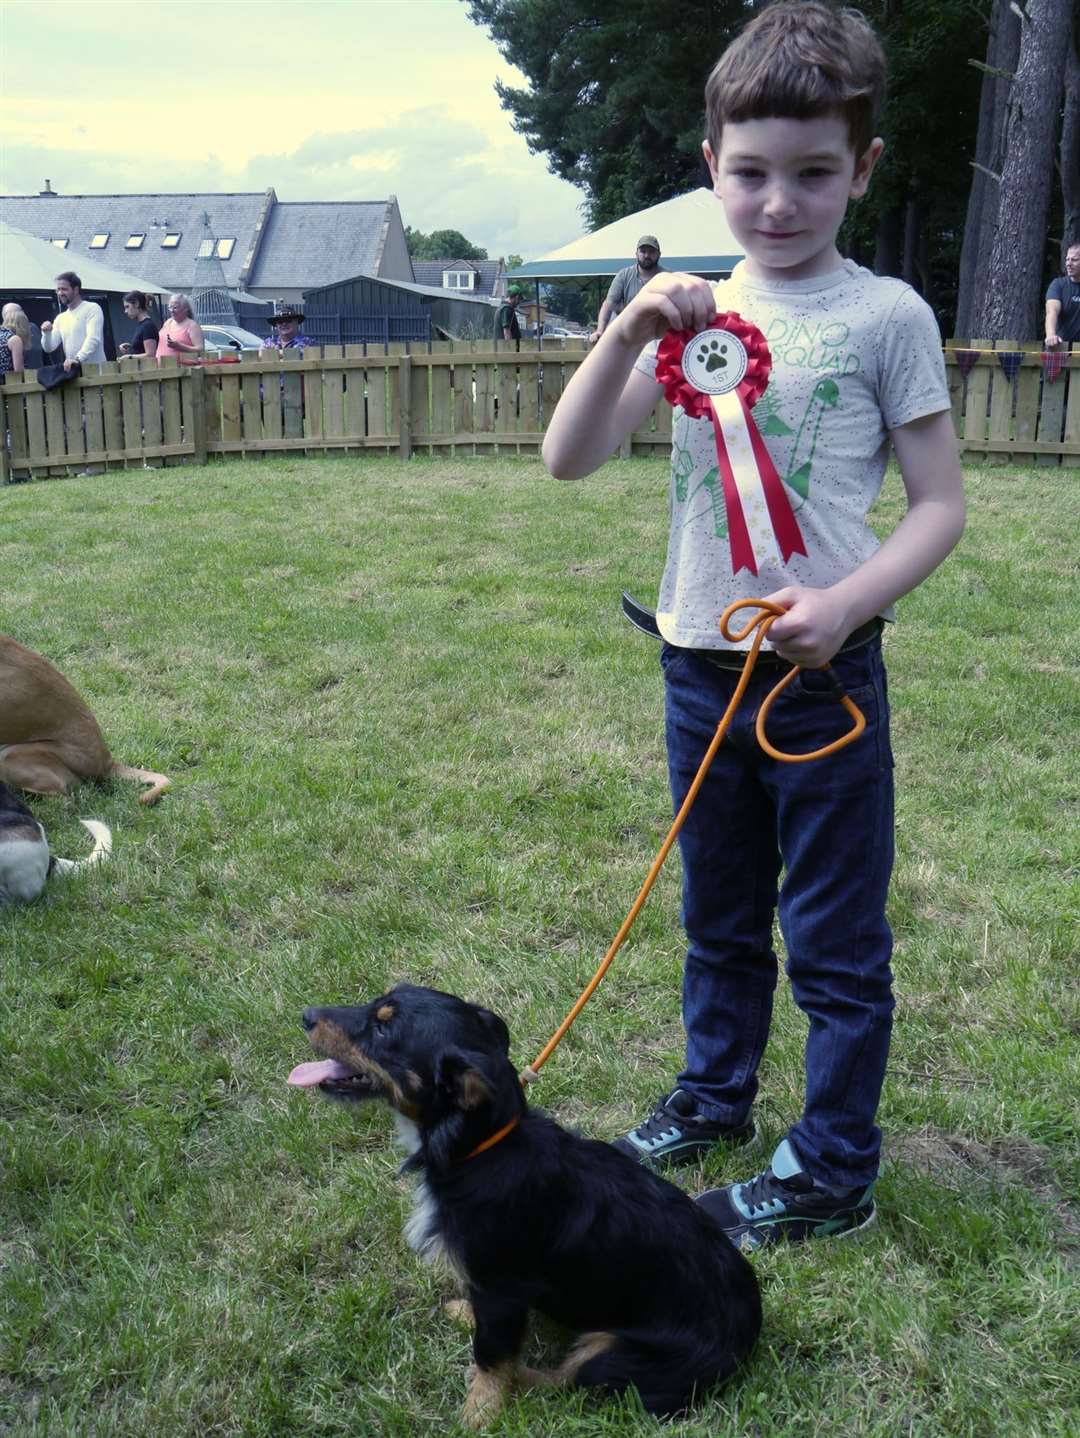 Rascal, a nine-month-old Jack Russell pictured with Sandy Strachen from Gartly, won the child's best friend category.